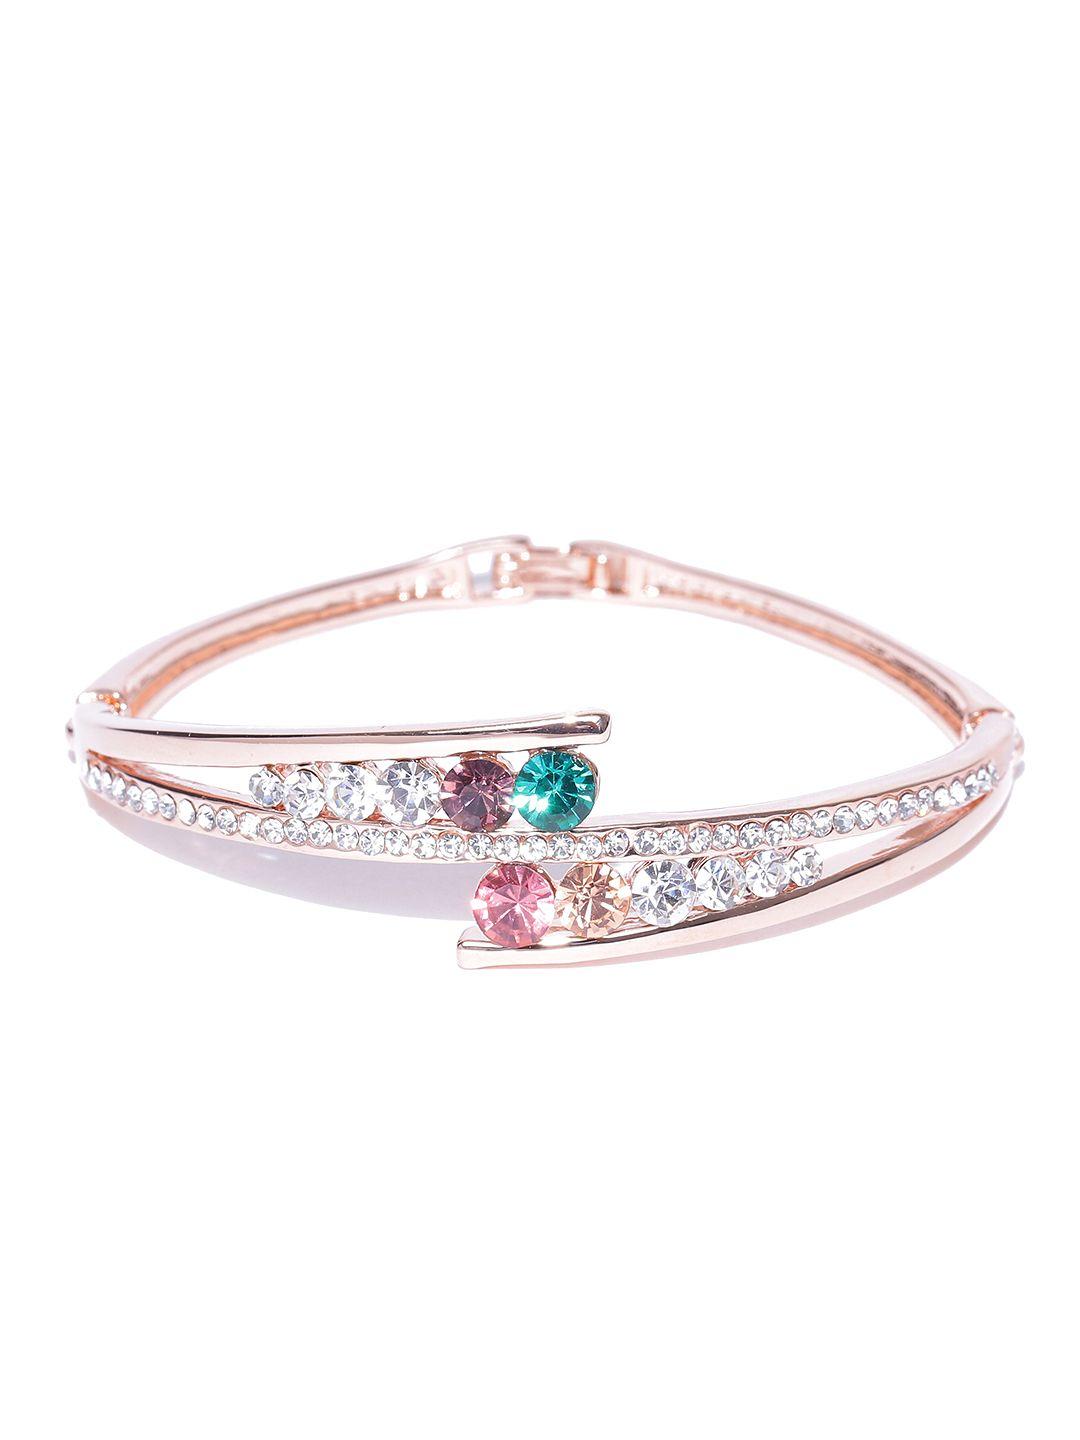 jewels-galaxy-rose-gold-plated-handcrafted-cz-stone-studded-bangle-style-bracelet